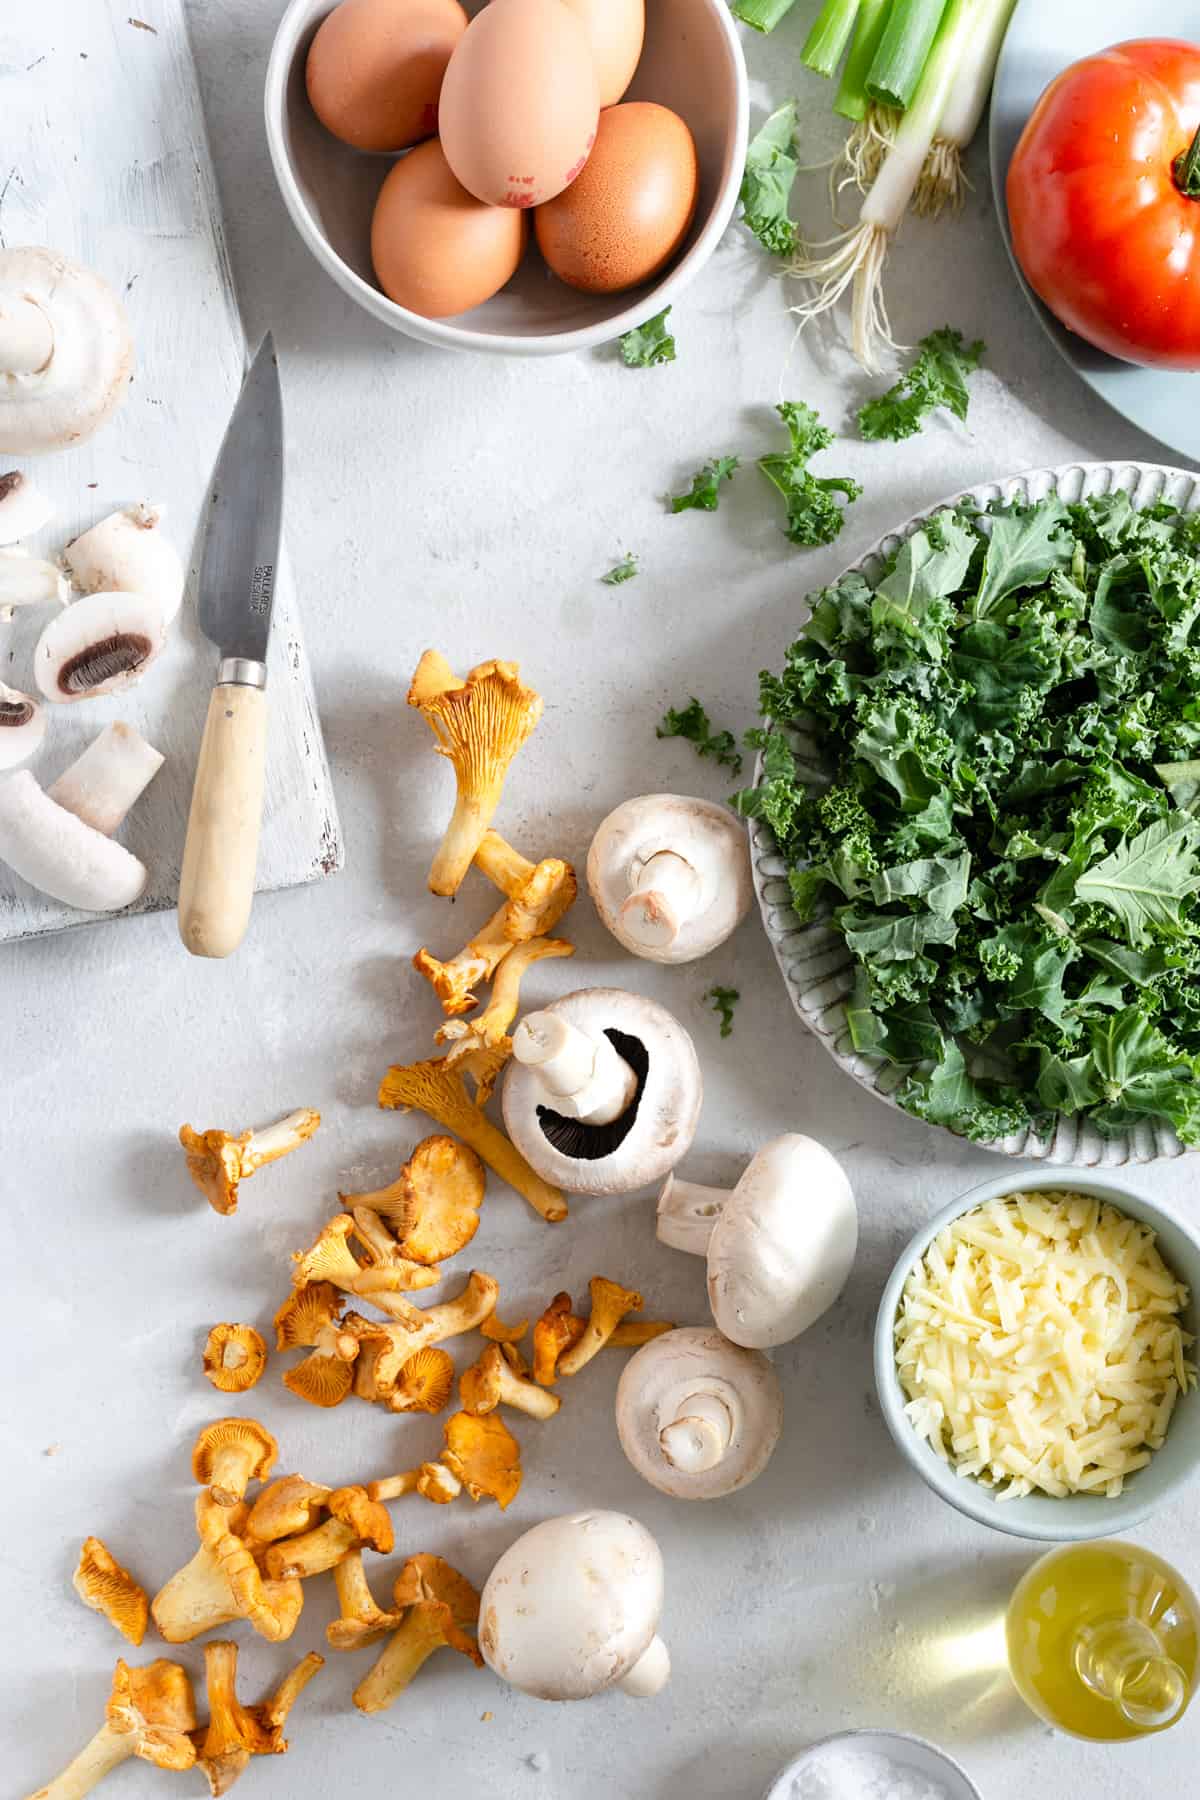 Ingredients for mushroom and kale frittata